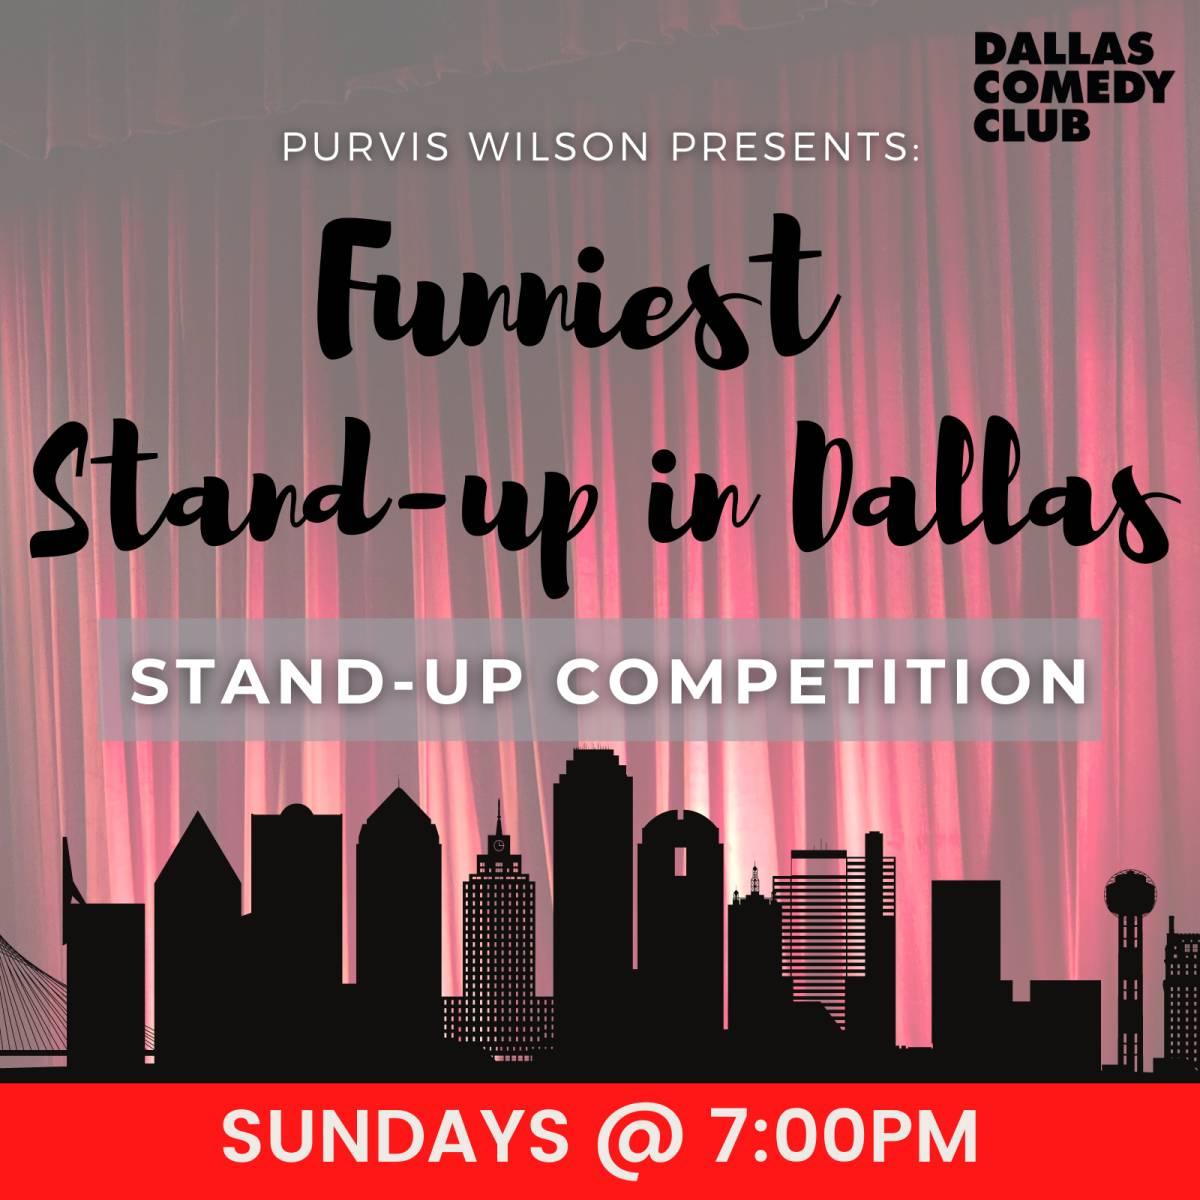 Purvis Wilson Presents: The Funniest Stand-up in Dallas Competition